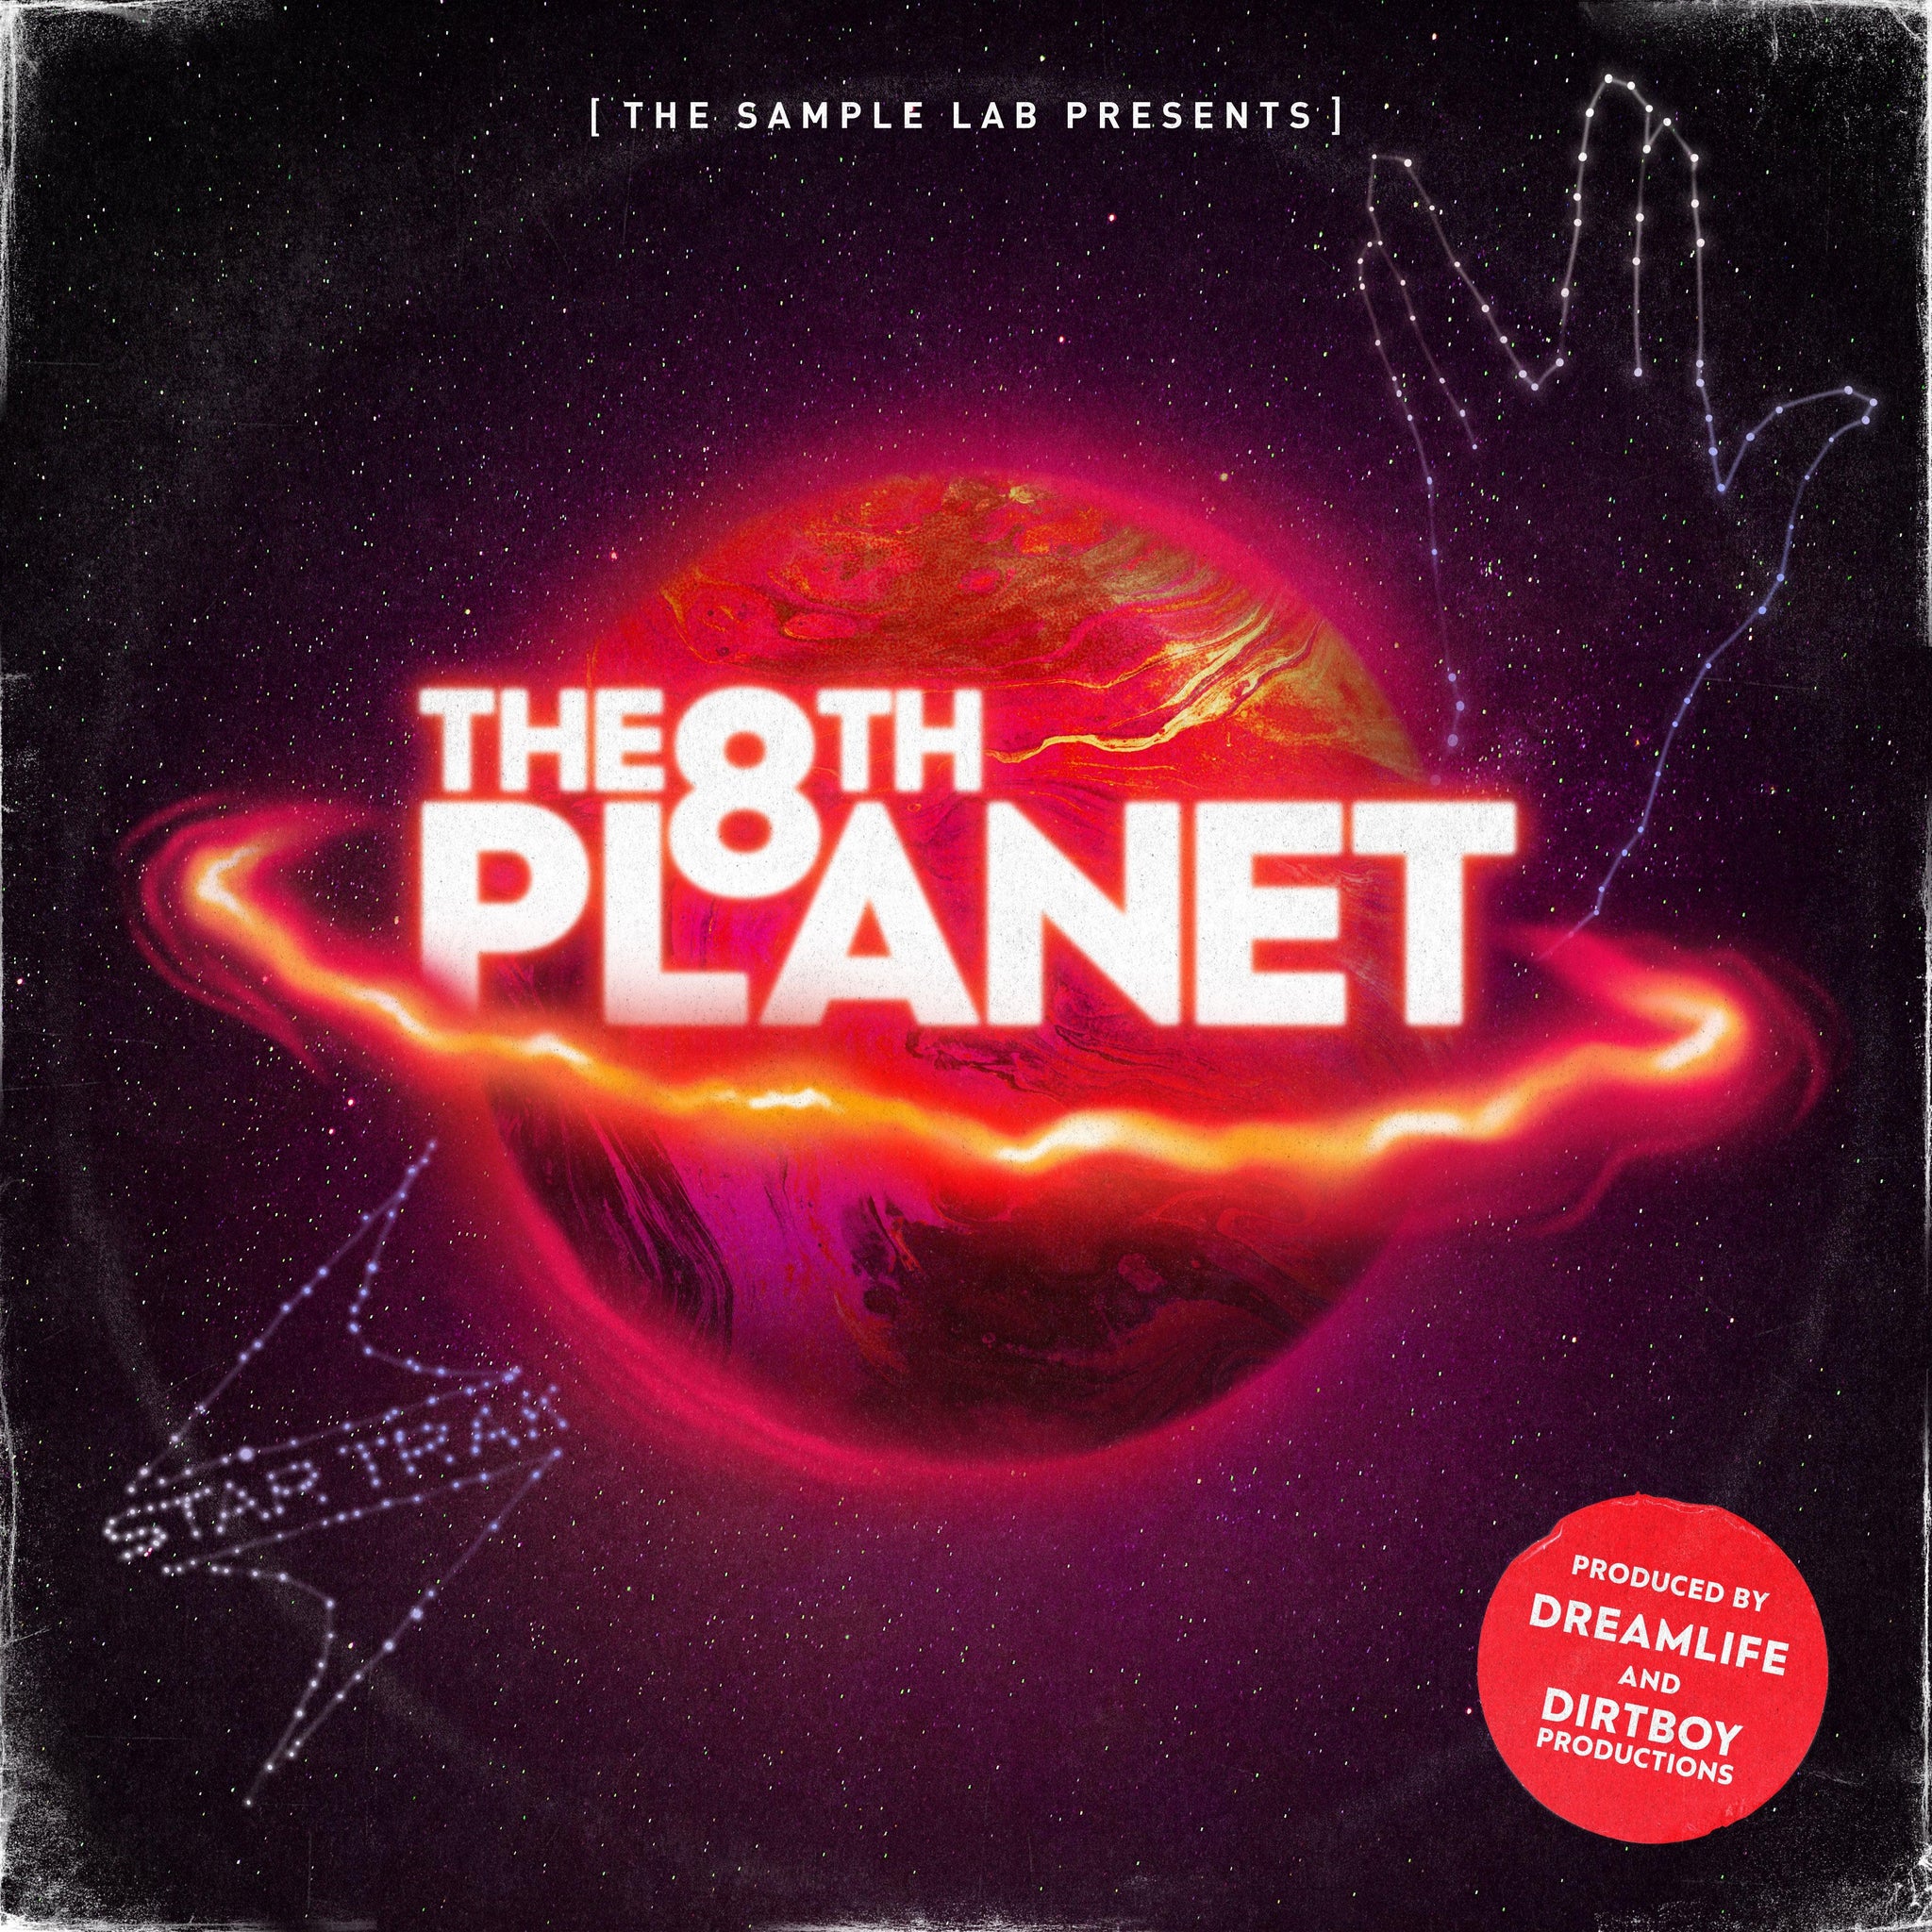 The 8th Planet - The Sample Lab